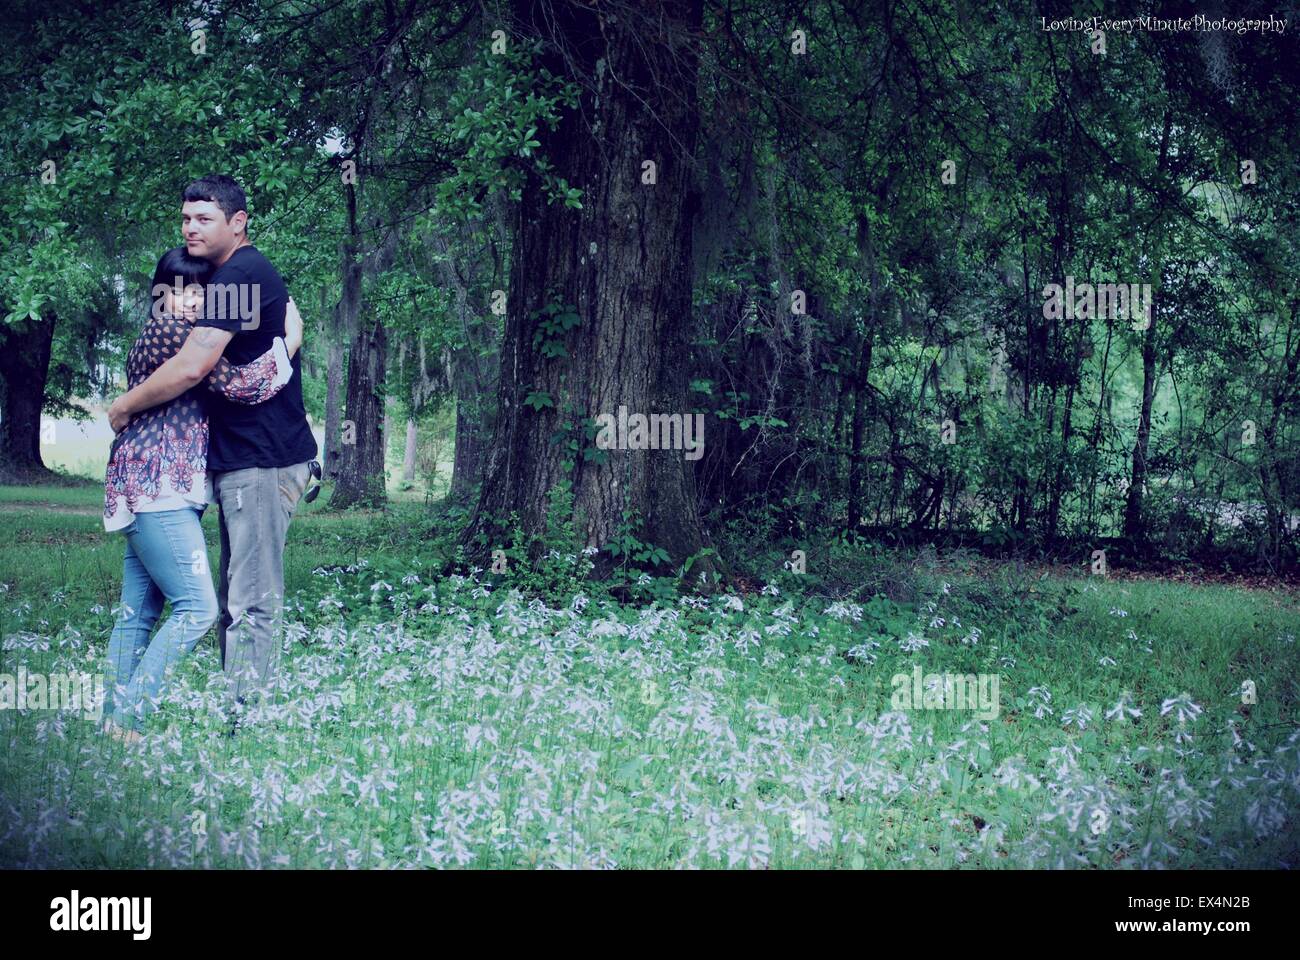 A beautiful meadow is just the backdrop for young love Stock Photo